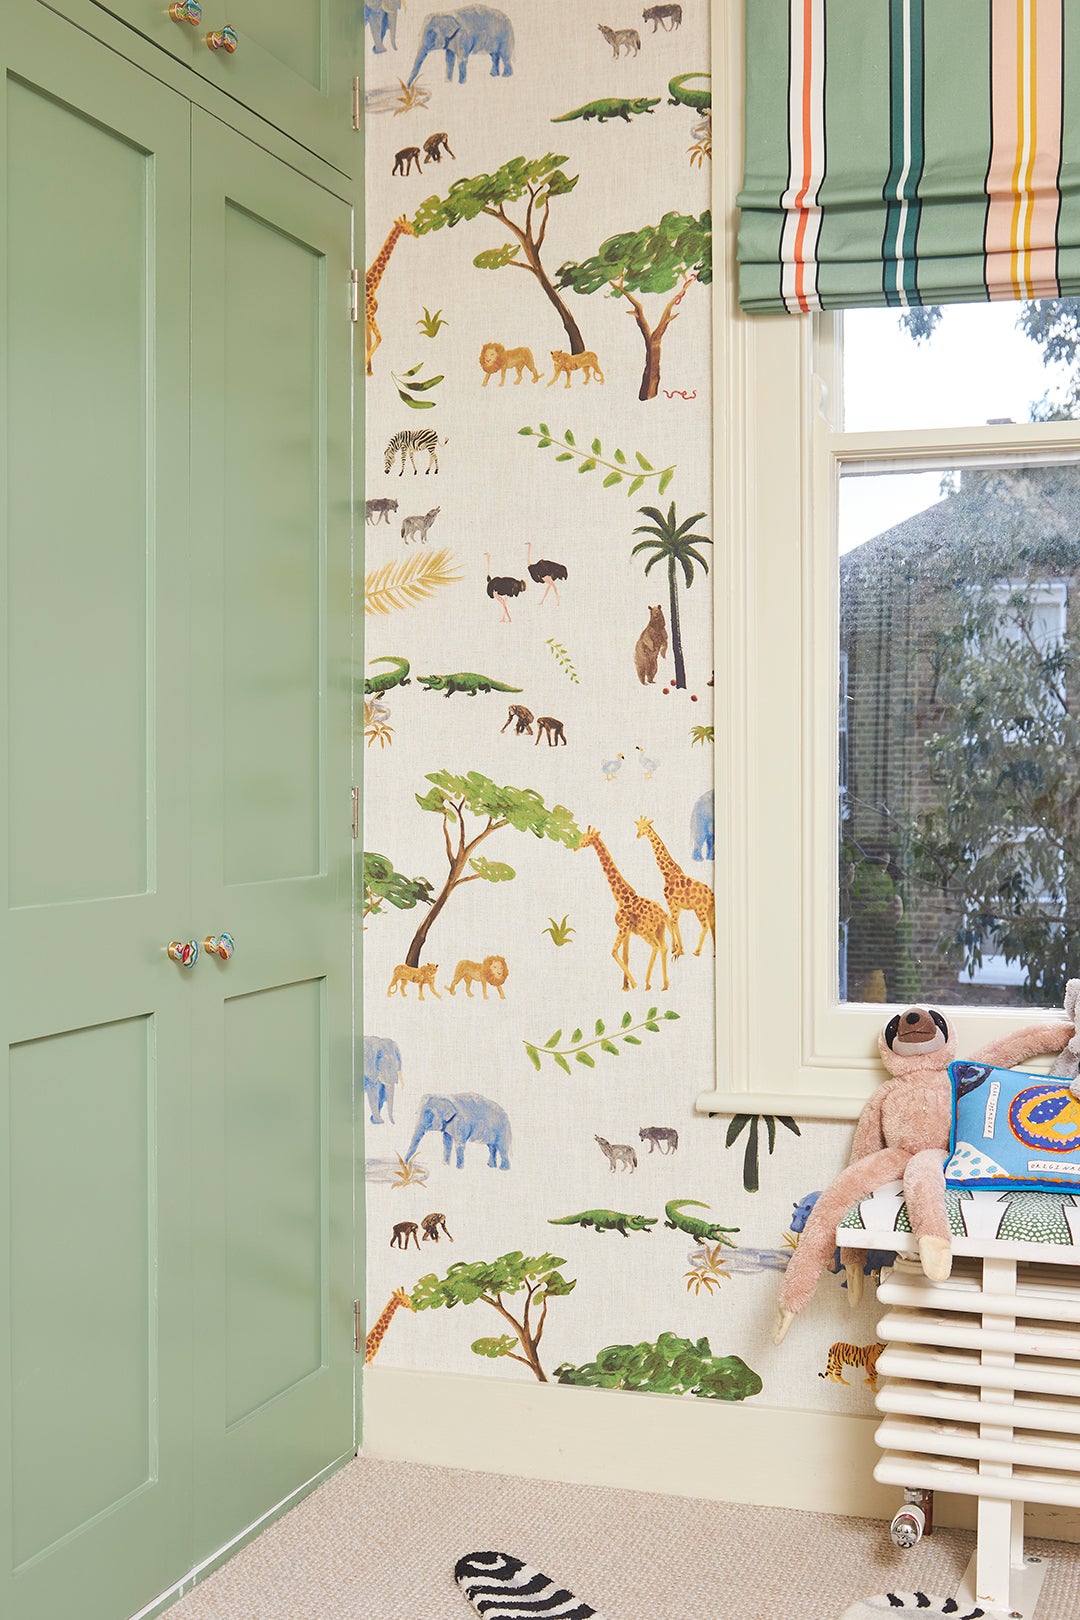 Pony Palace, Safari Adventure—Each of These 4 Kids’ Rooms Is Its Own Little World